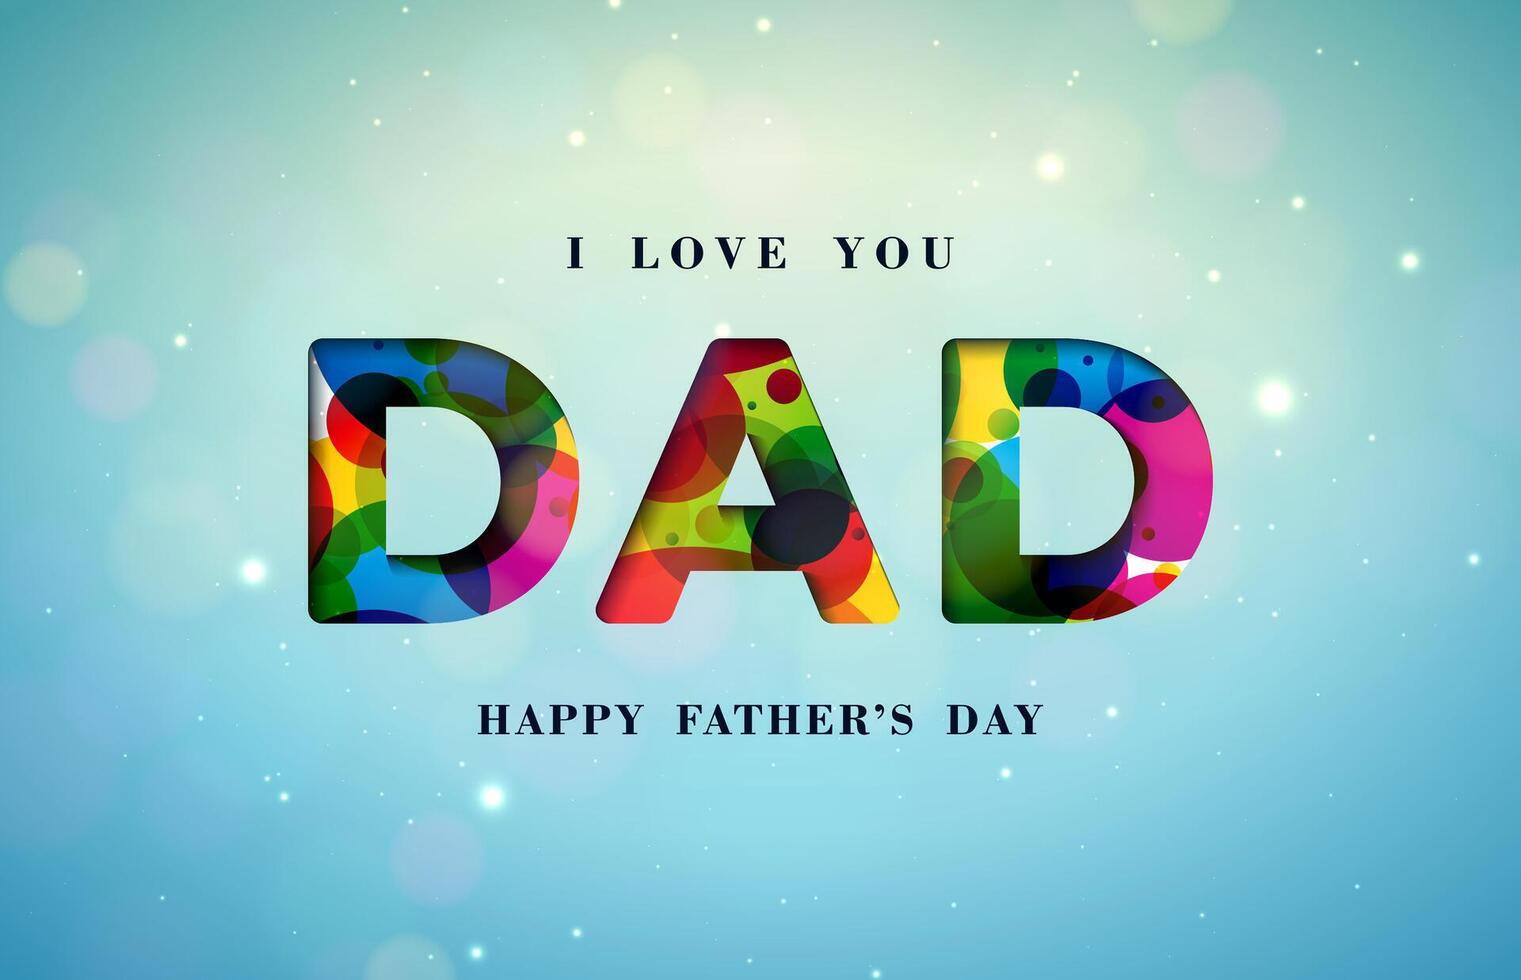 I Love You Dad. Happy Father's Day Greeting Card Design with Colorful Cutting Letter on Shiny Light Blue Background. Vector Celebration Illustration for Dad. Template for Banner, Flyer, Invitation